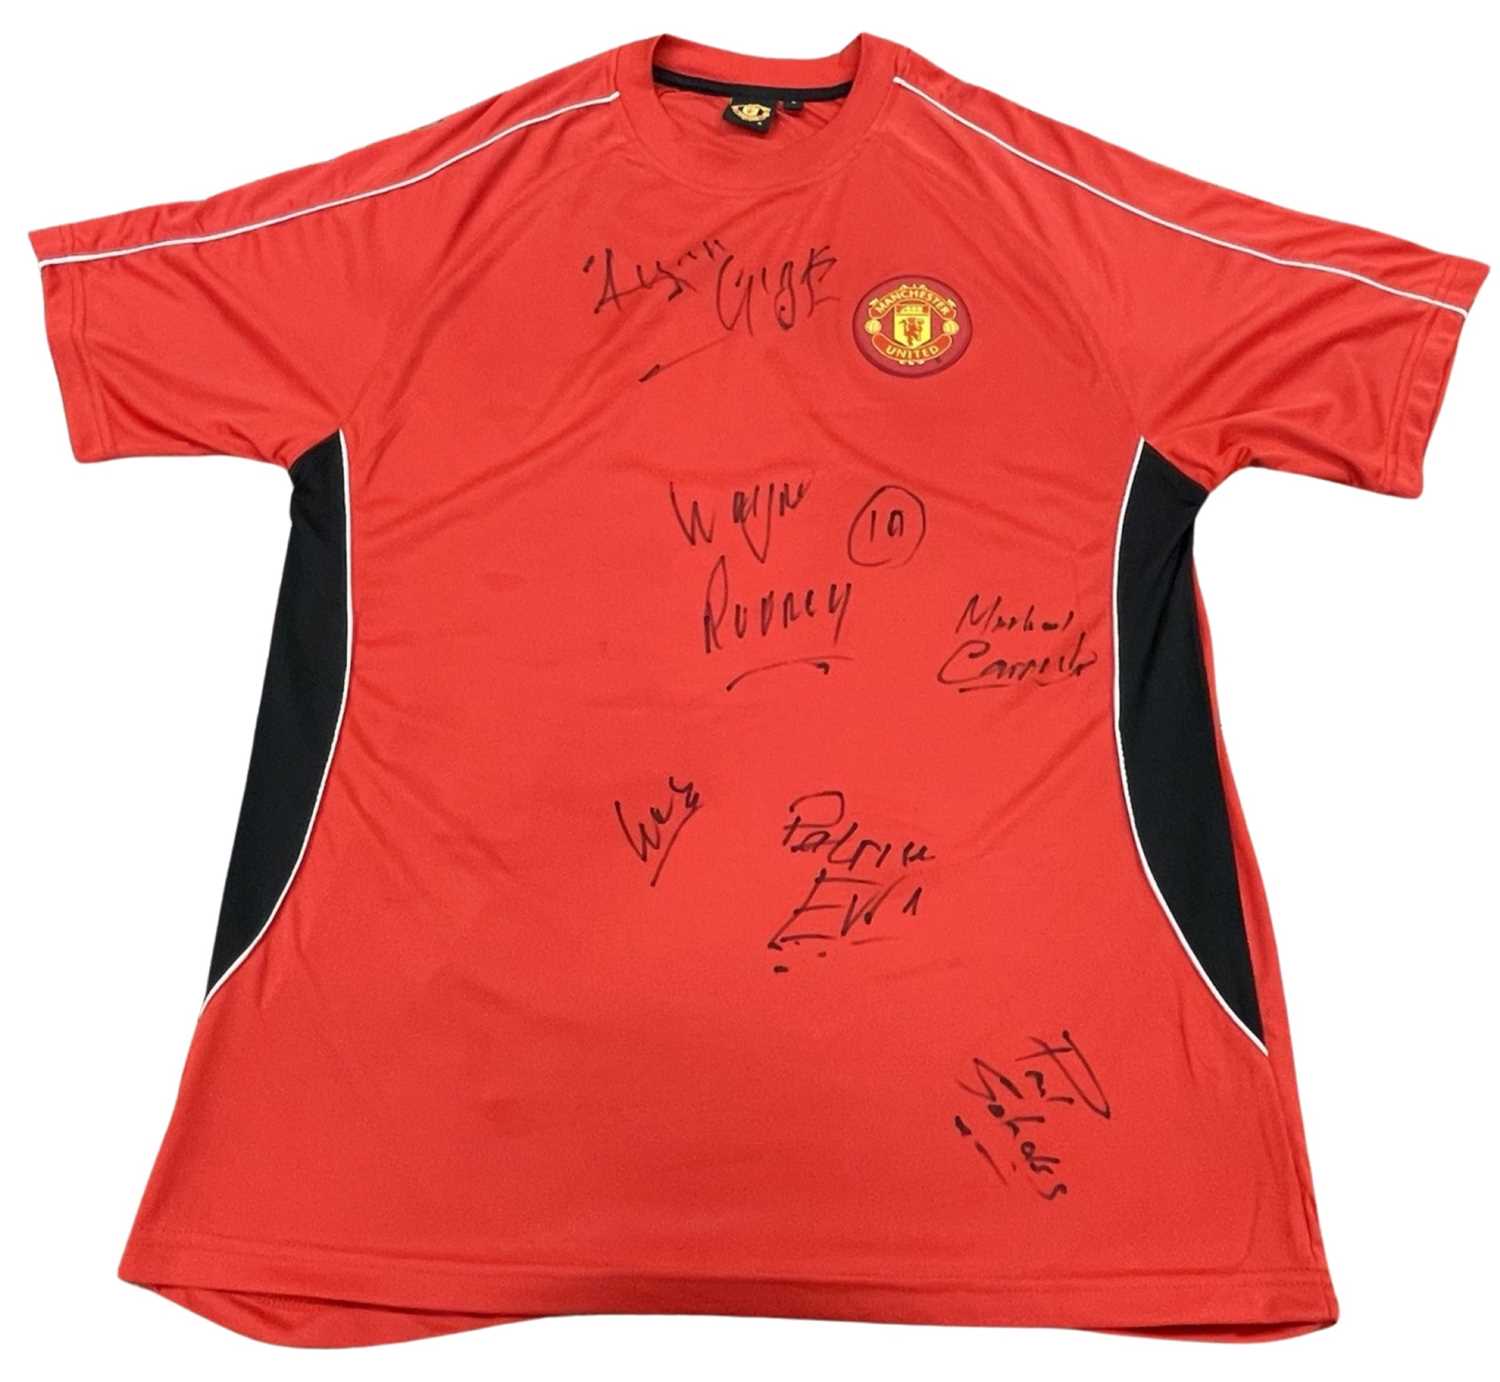 An official Manchester United shirt, bearing the signatures of: - Ryan Giggs - Wayne Rooney - Paul